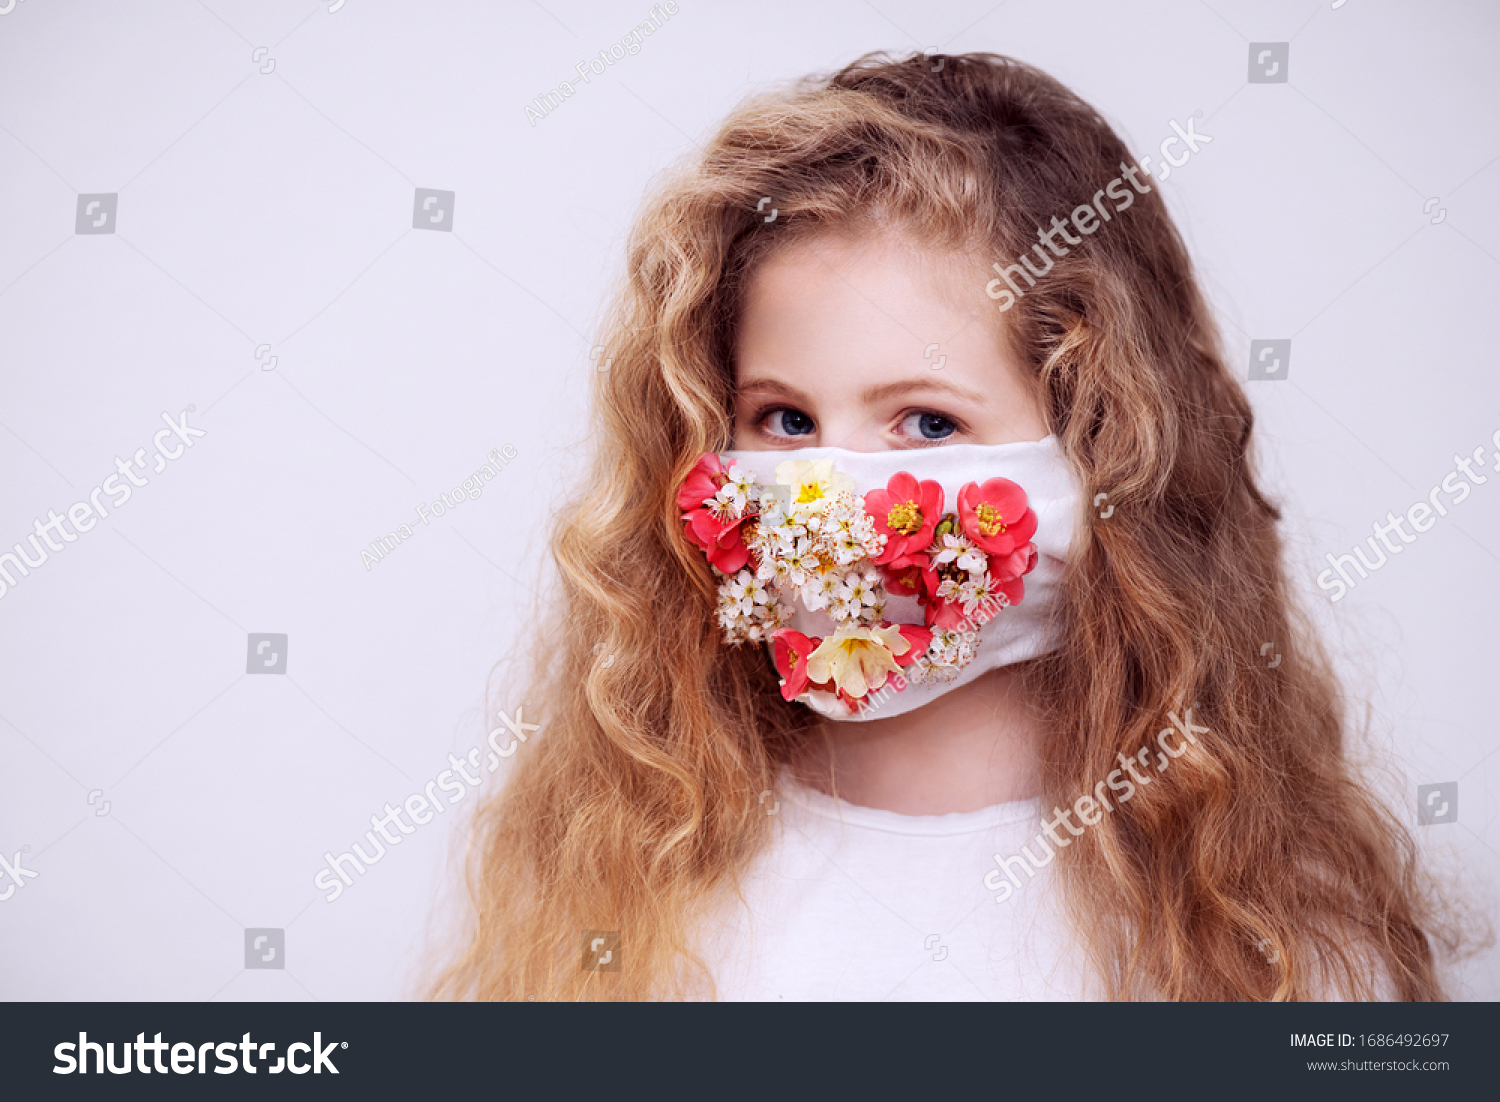 A girl with a respirator. The mask is decorated with flowers. #1686492697